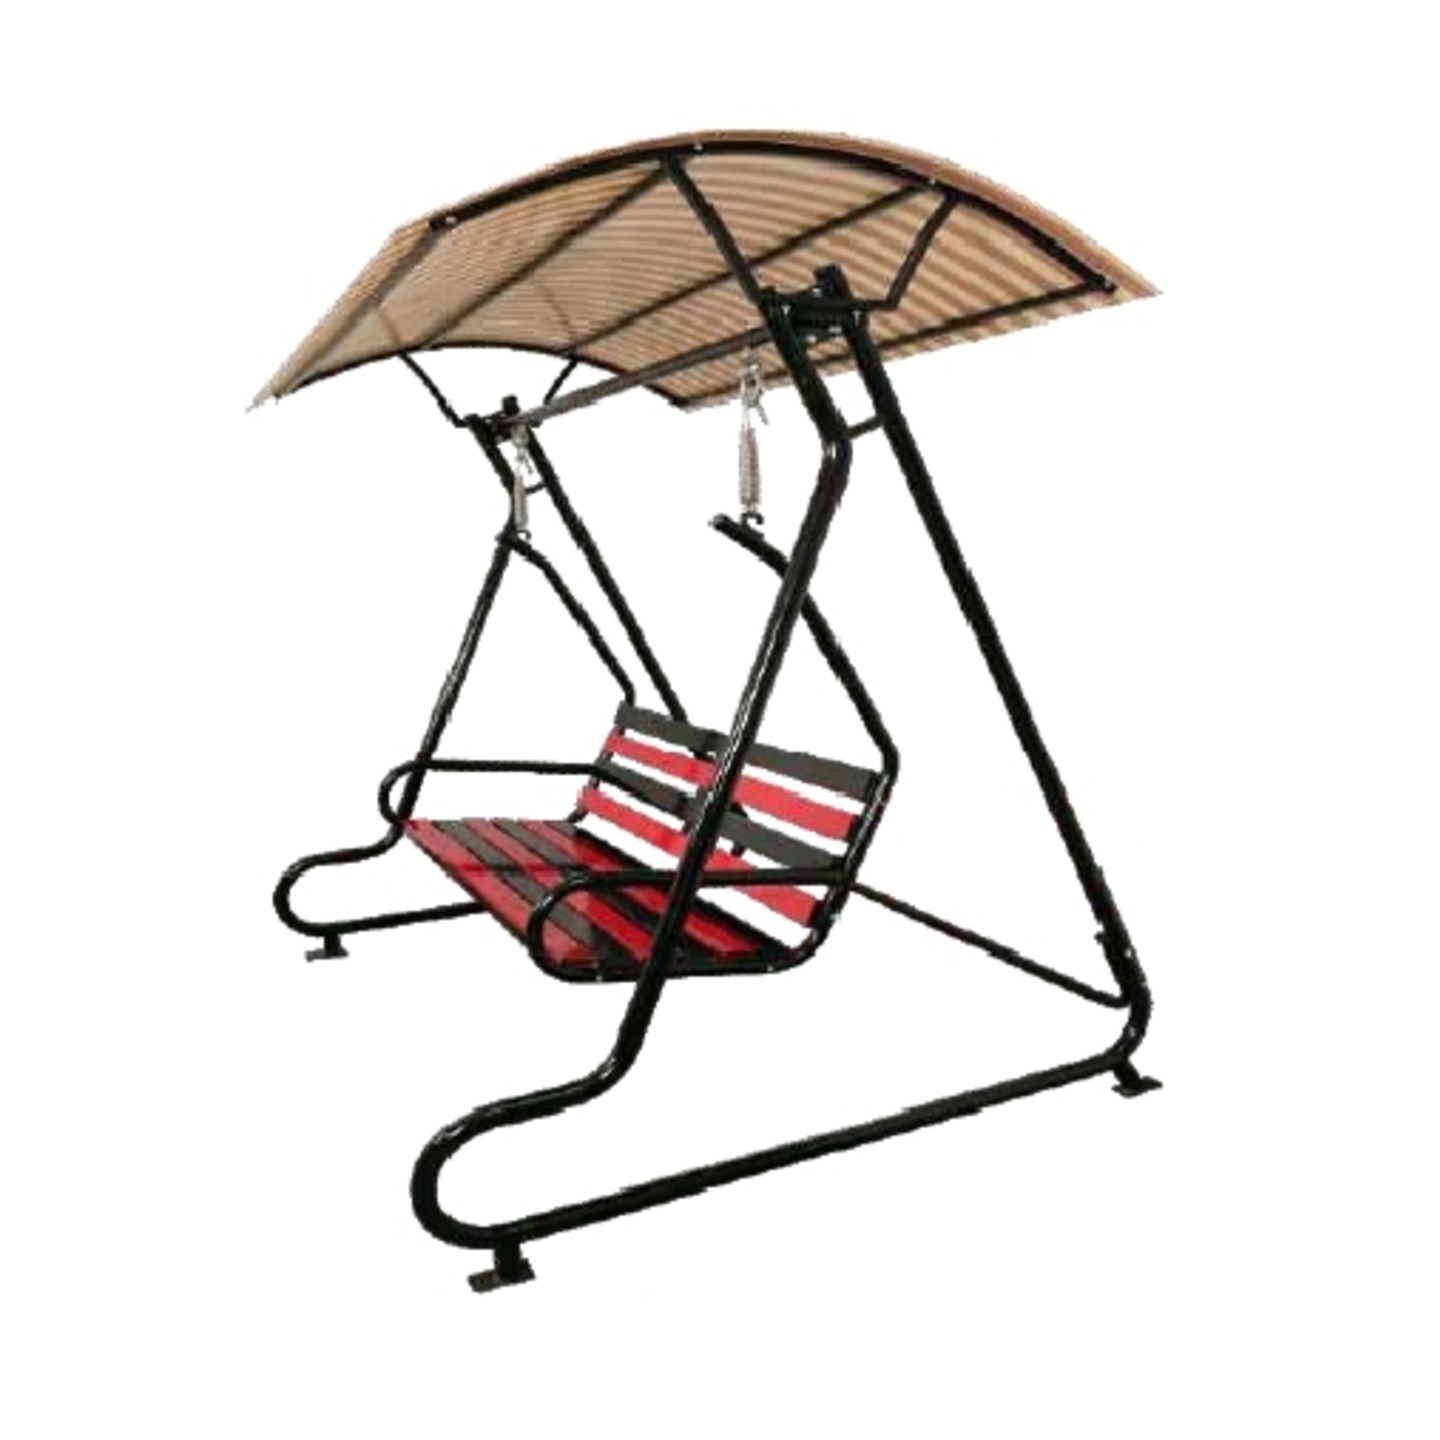 HJA Swing With Stand Roof HOJ-006 In Red & Black Colour